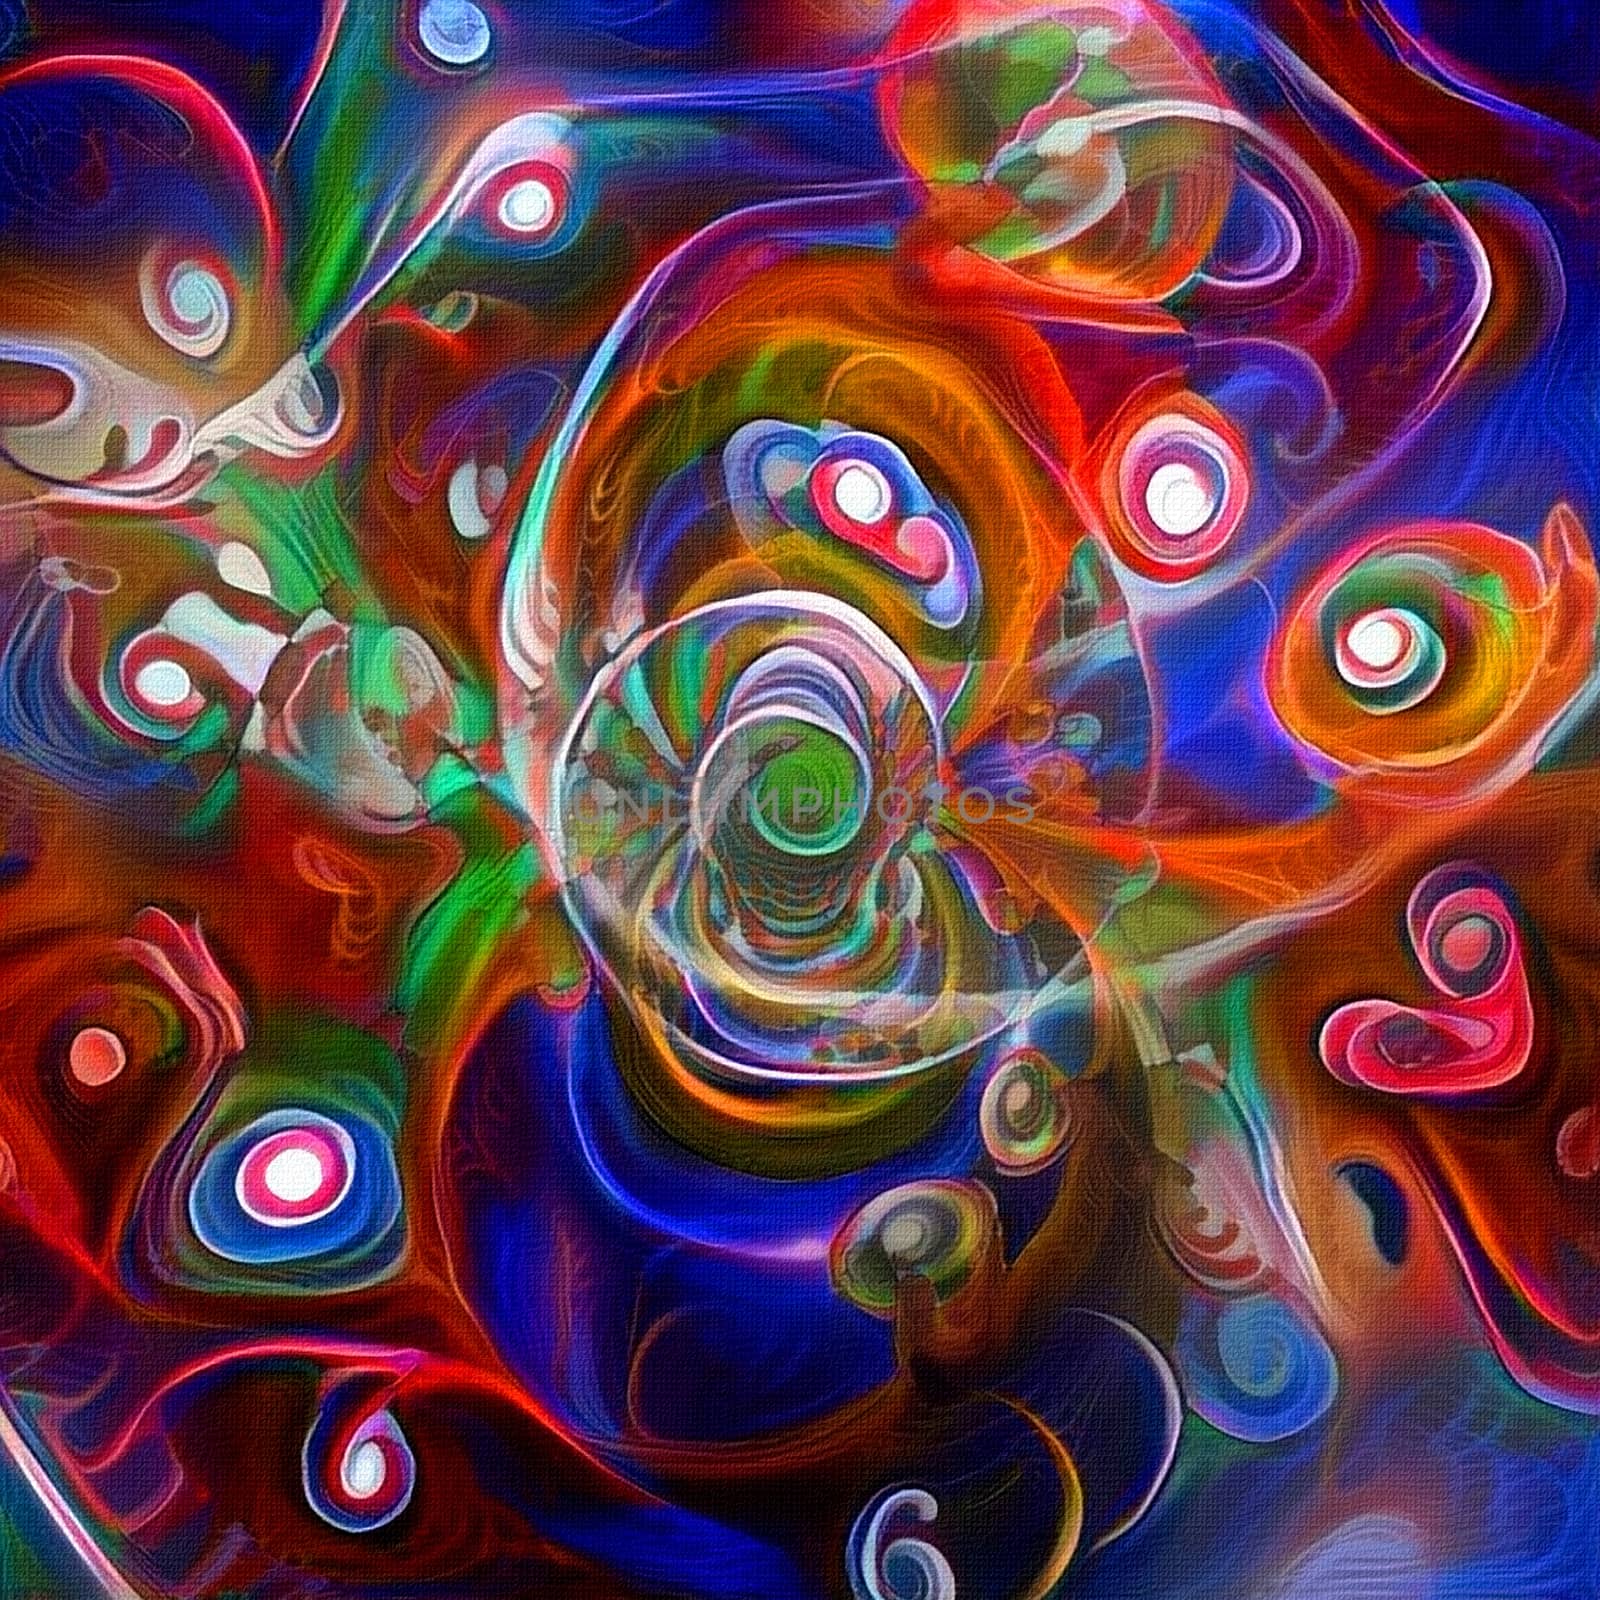 Vortex of colors by applesstock